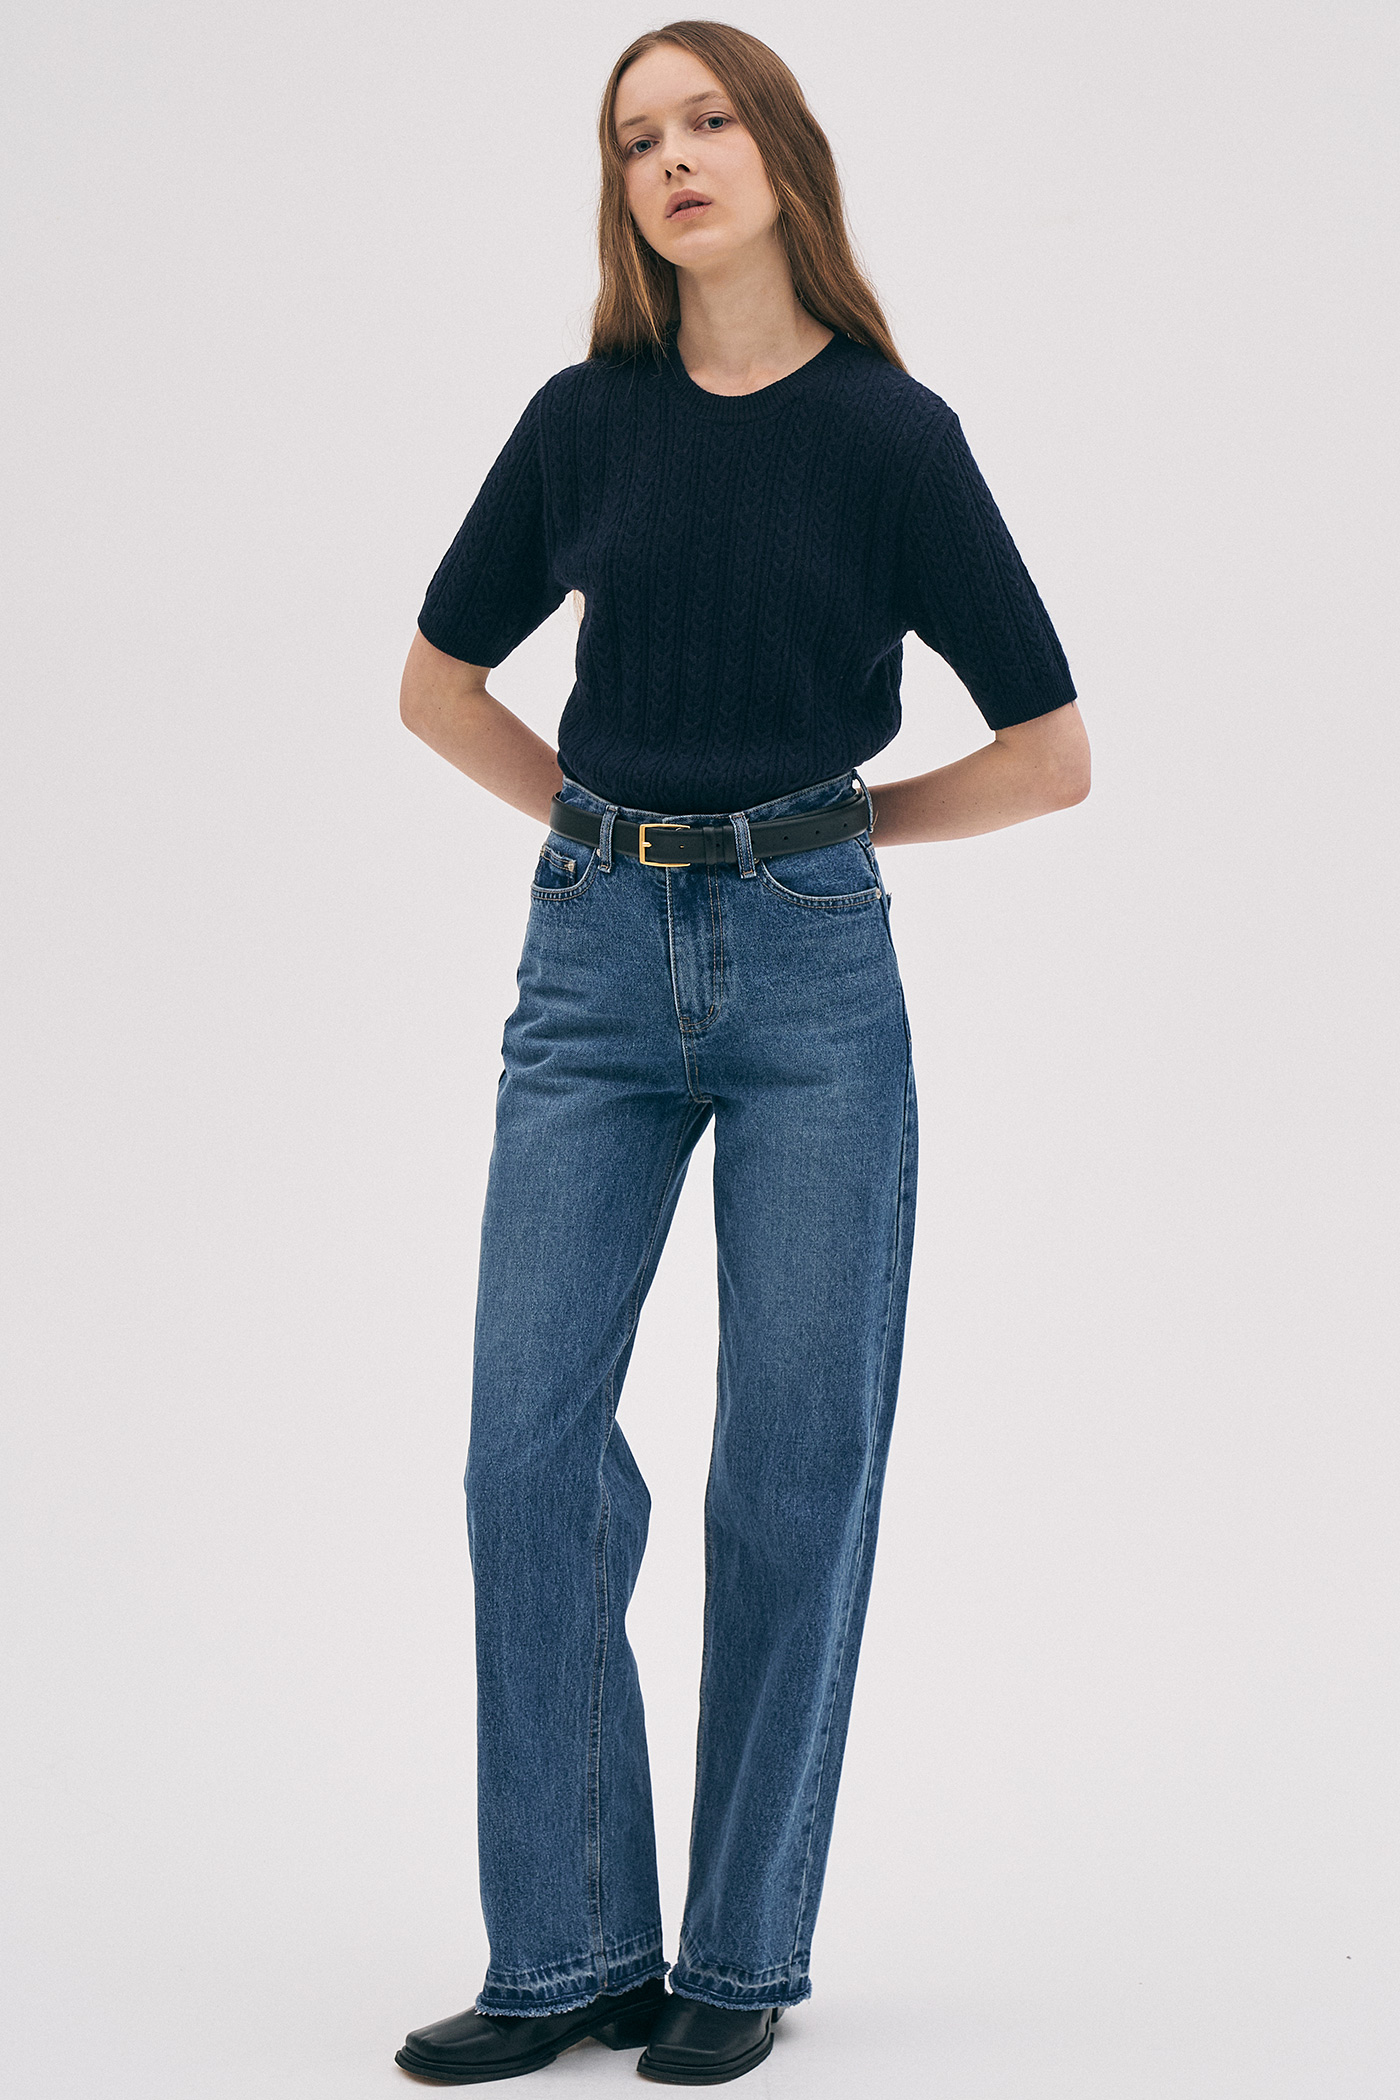 Wool Cable Knit Top[LMBBAUKN135]-Navy